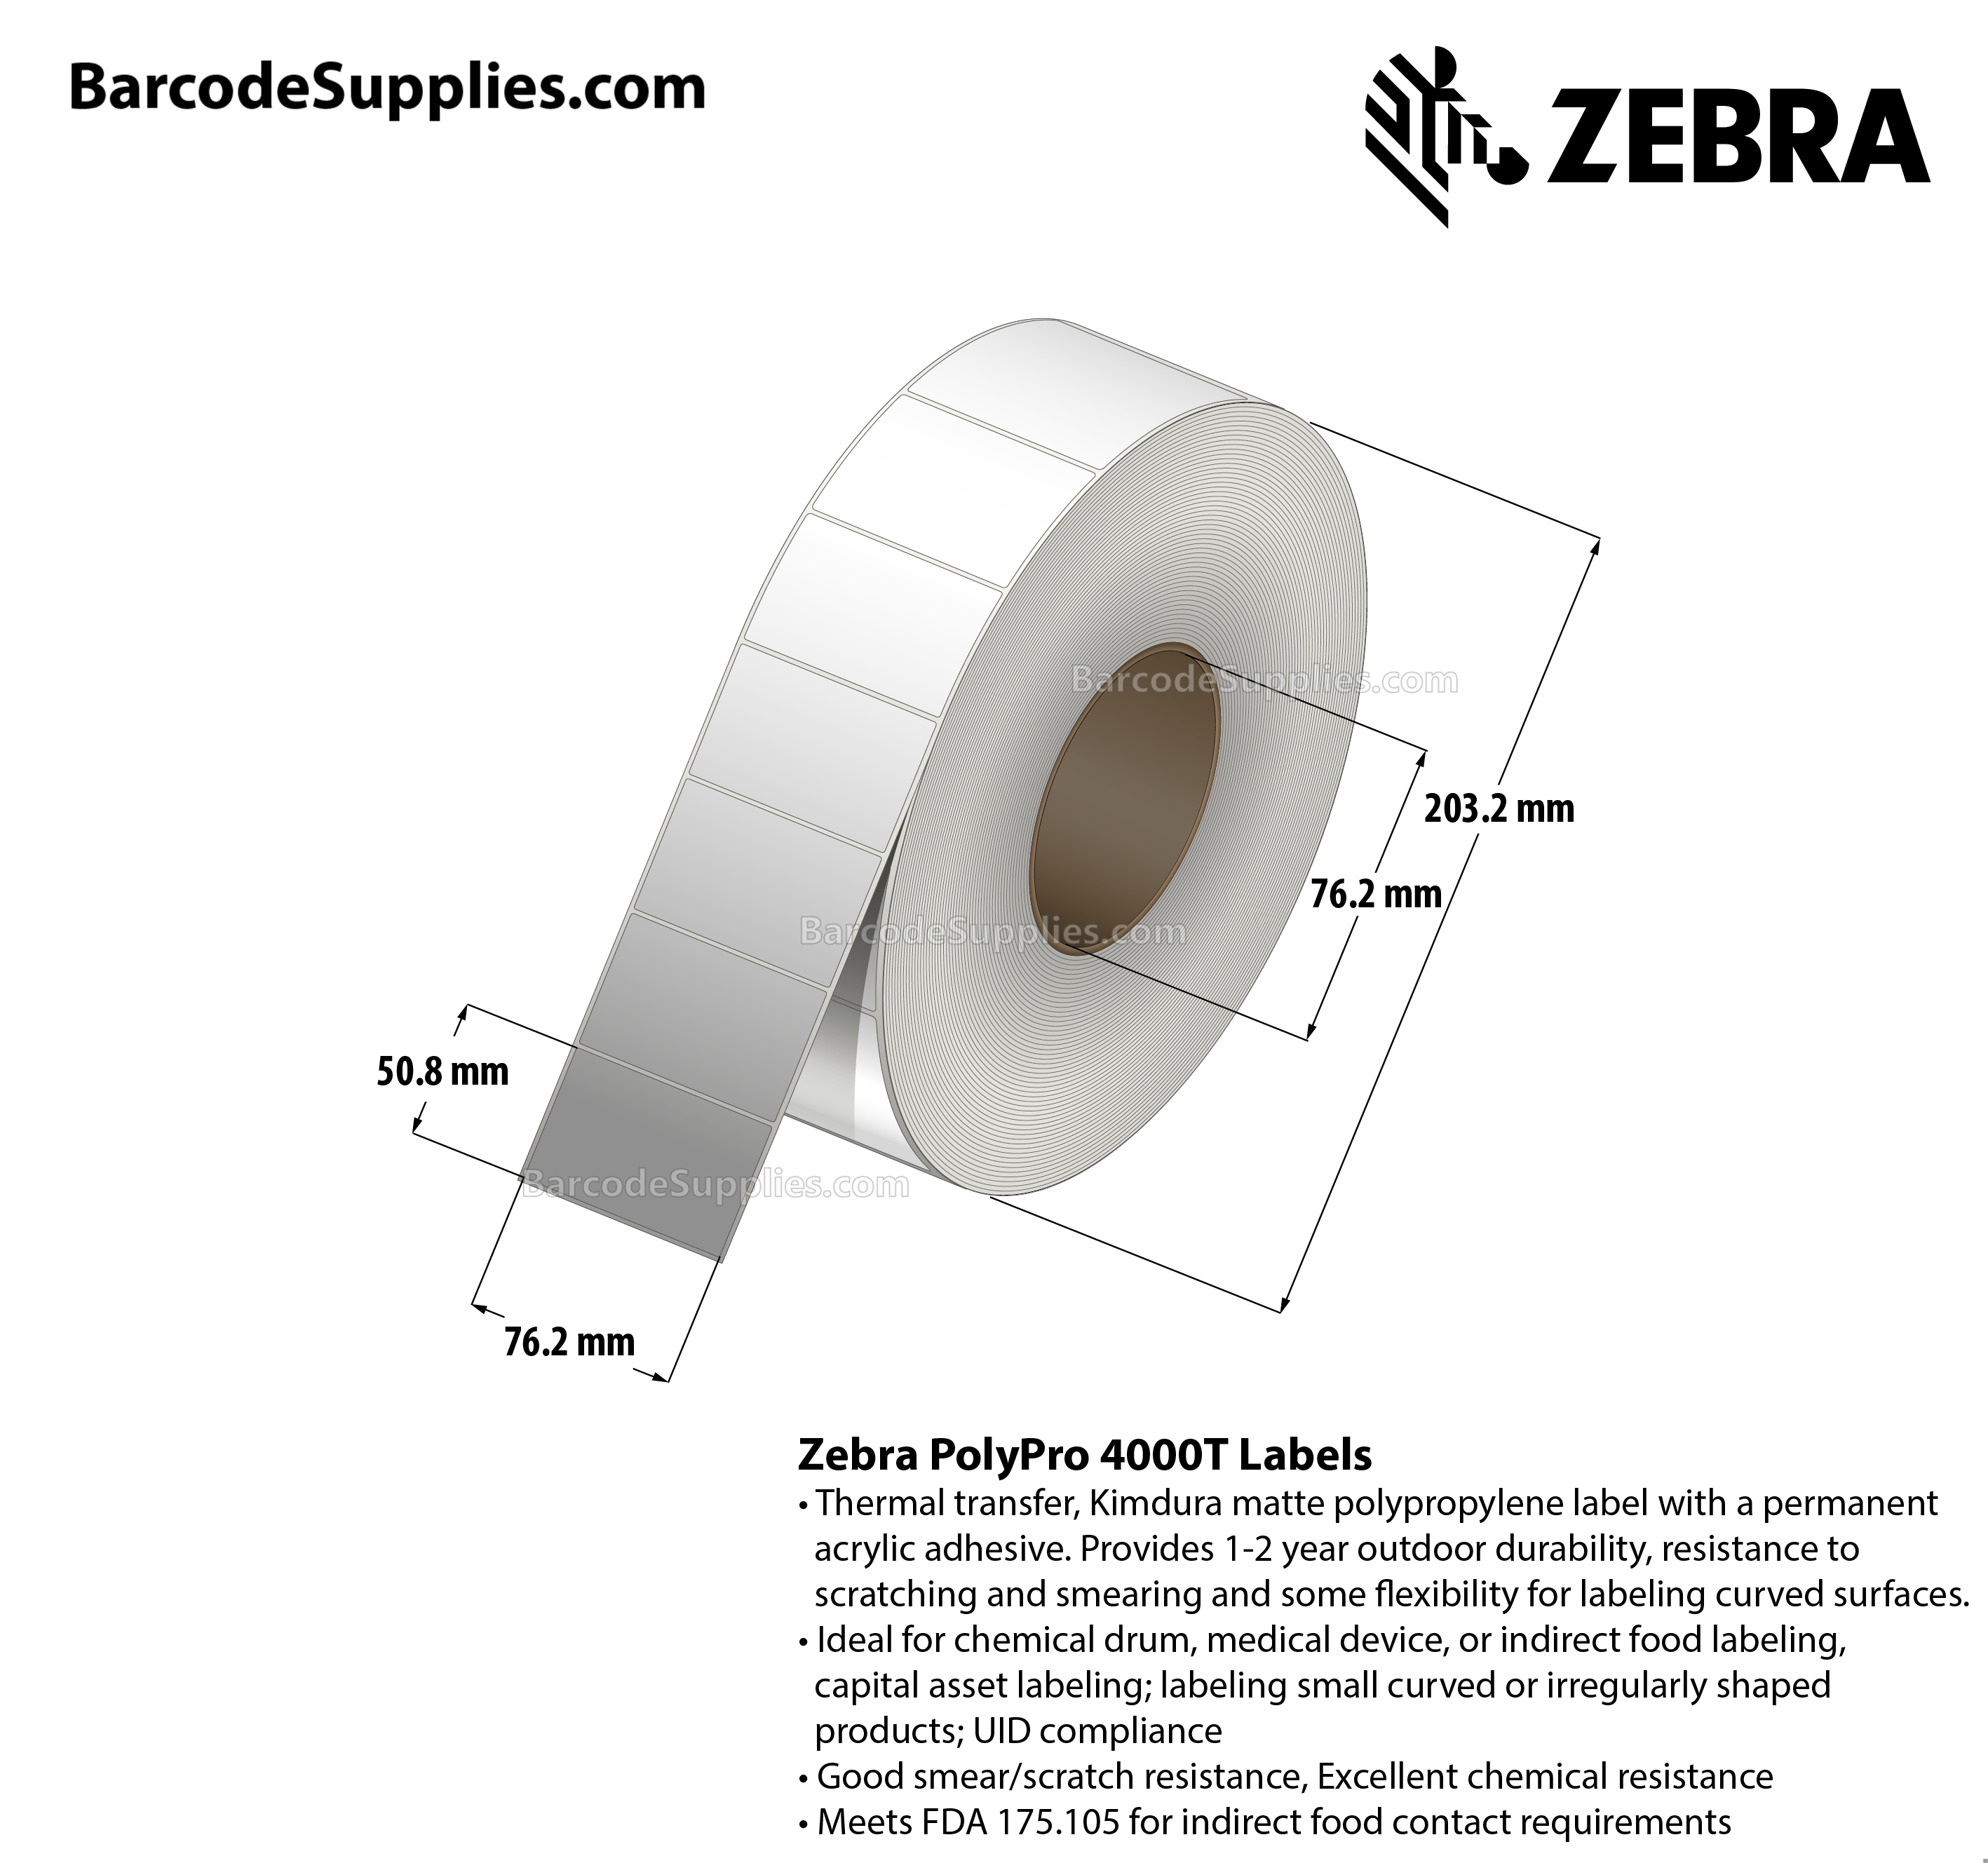 3 x 2 Thermal Transfer White PolyPro 4000T Labels With Permanent Adhesive - Not Perforated - 2230 Labels Per Roll - Carton Of 4 Rolls - 8920 Labels Total - MPN: 10011689